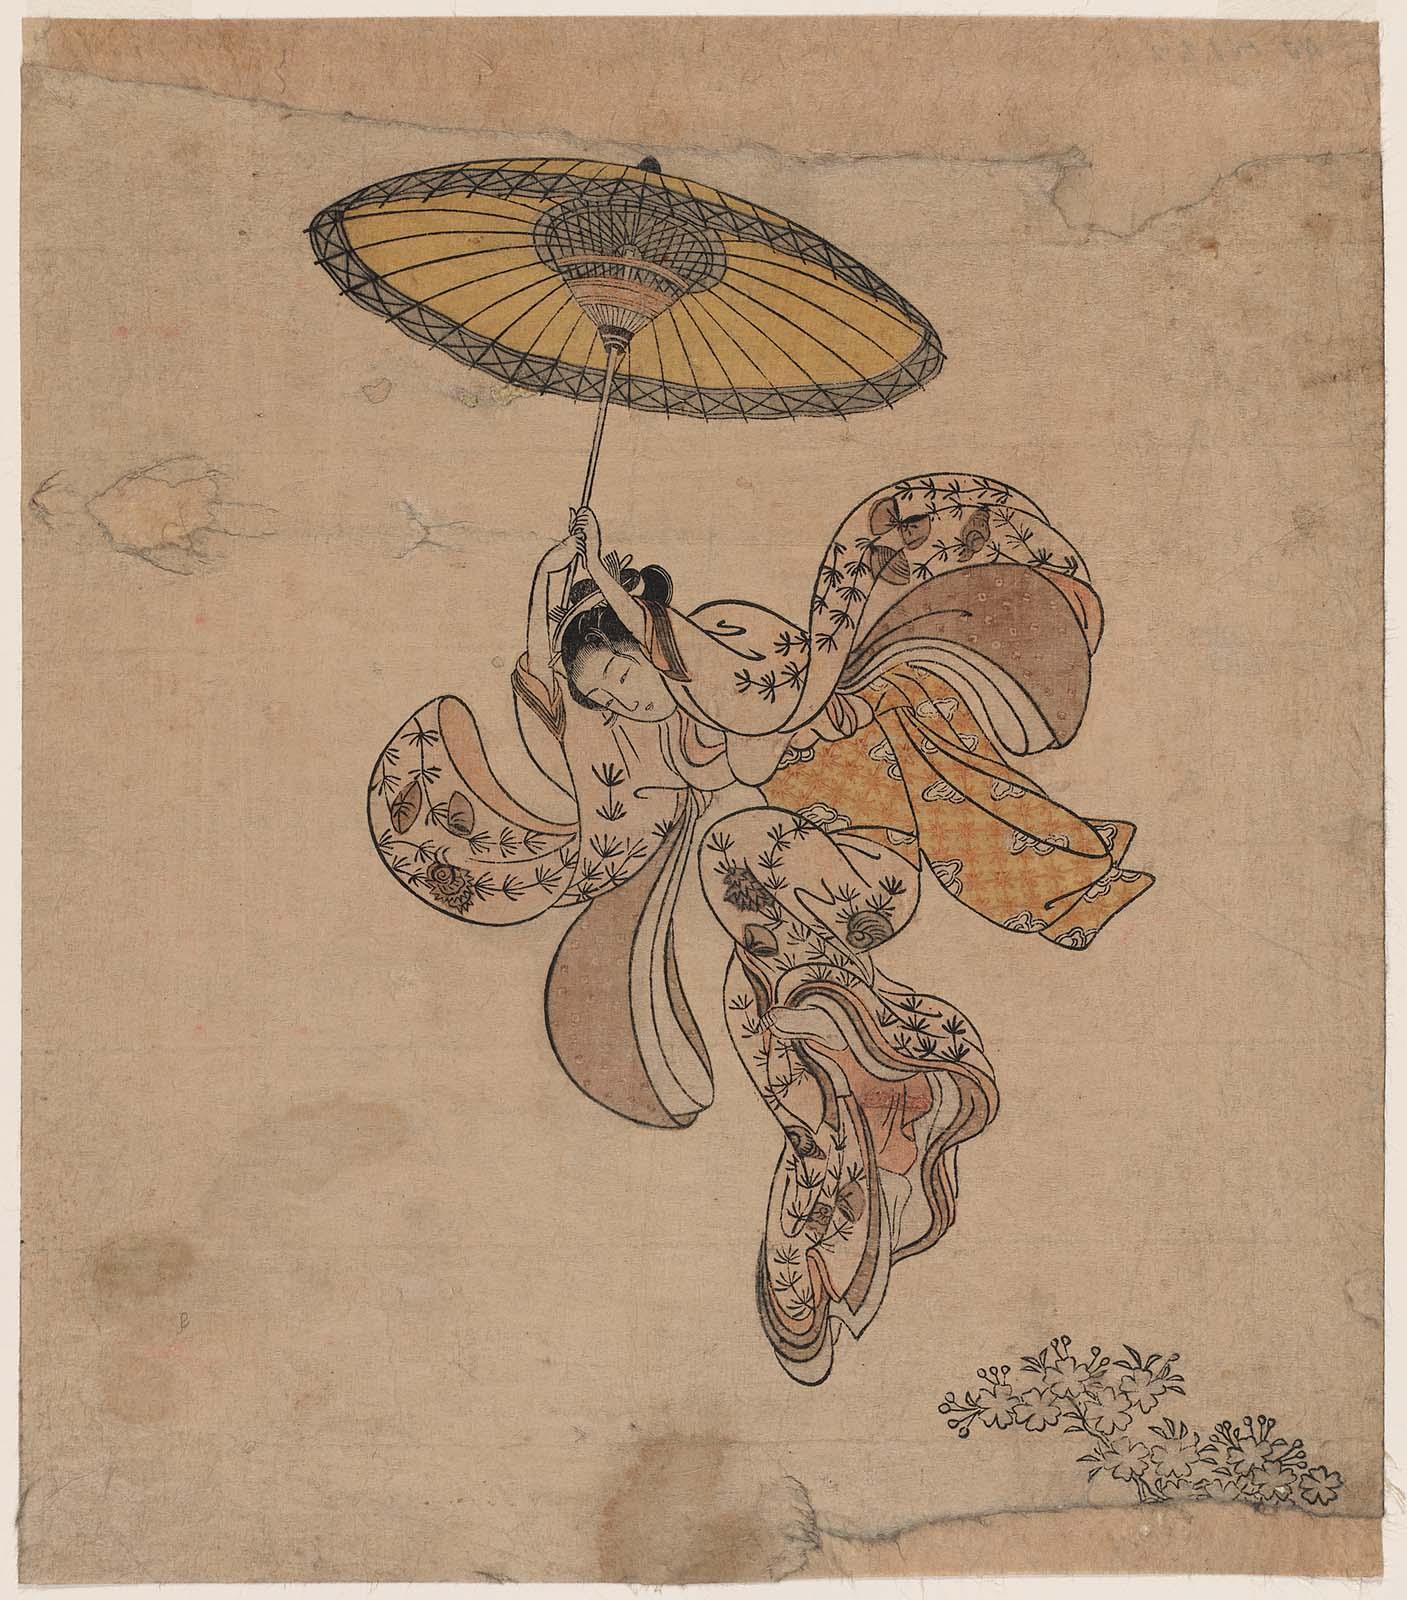 Young Woman Jumping from the Kiyomizu Temple Balcony with an 